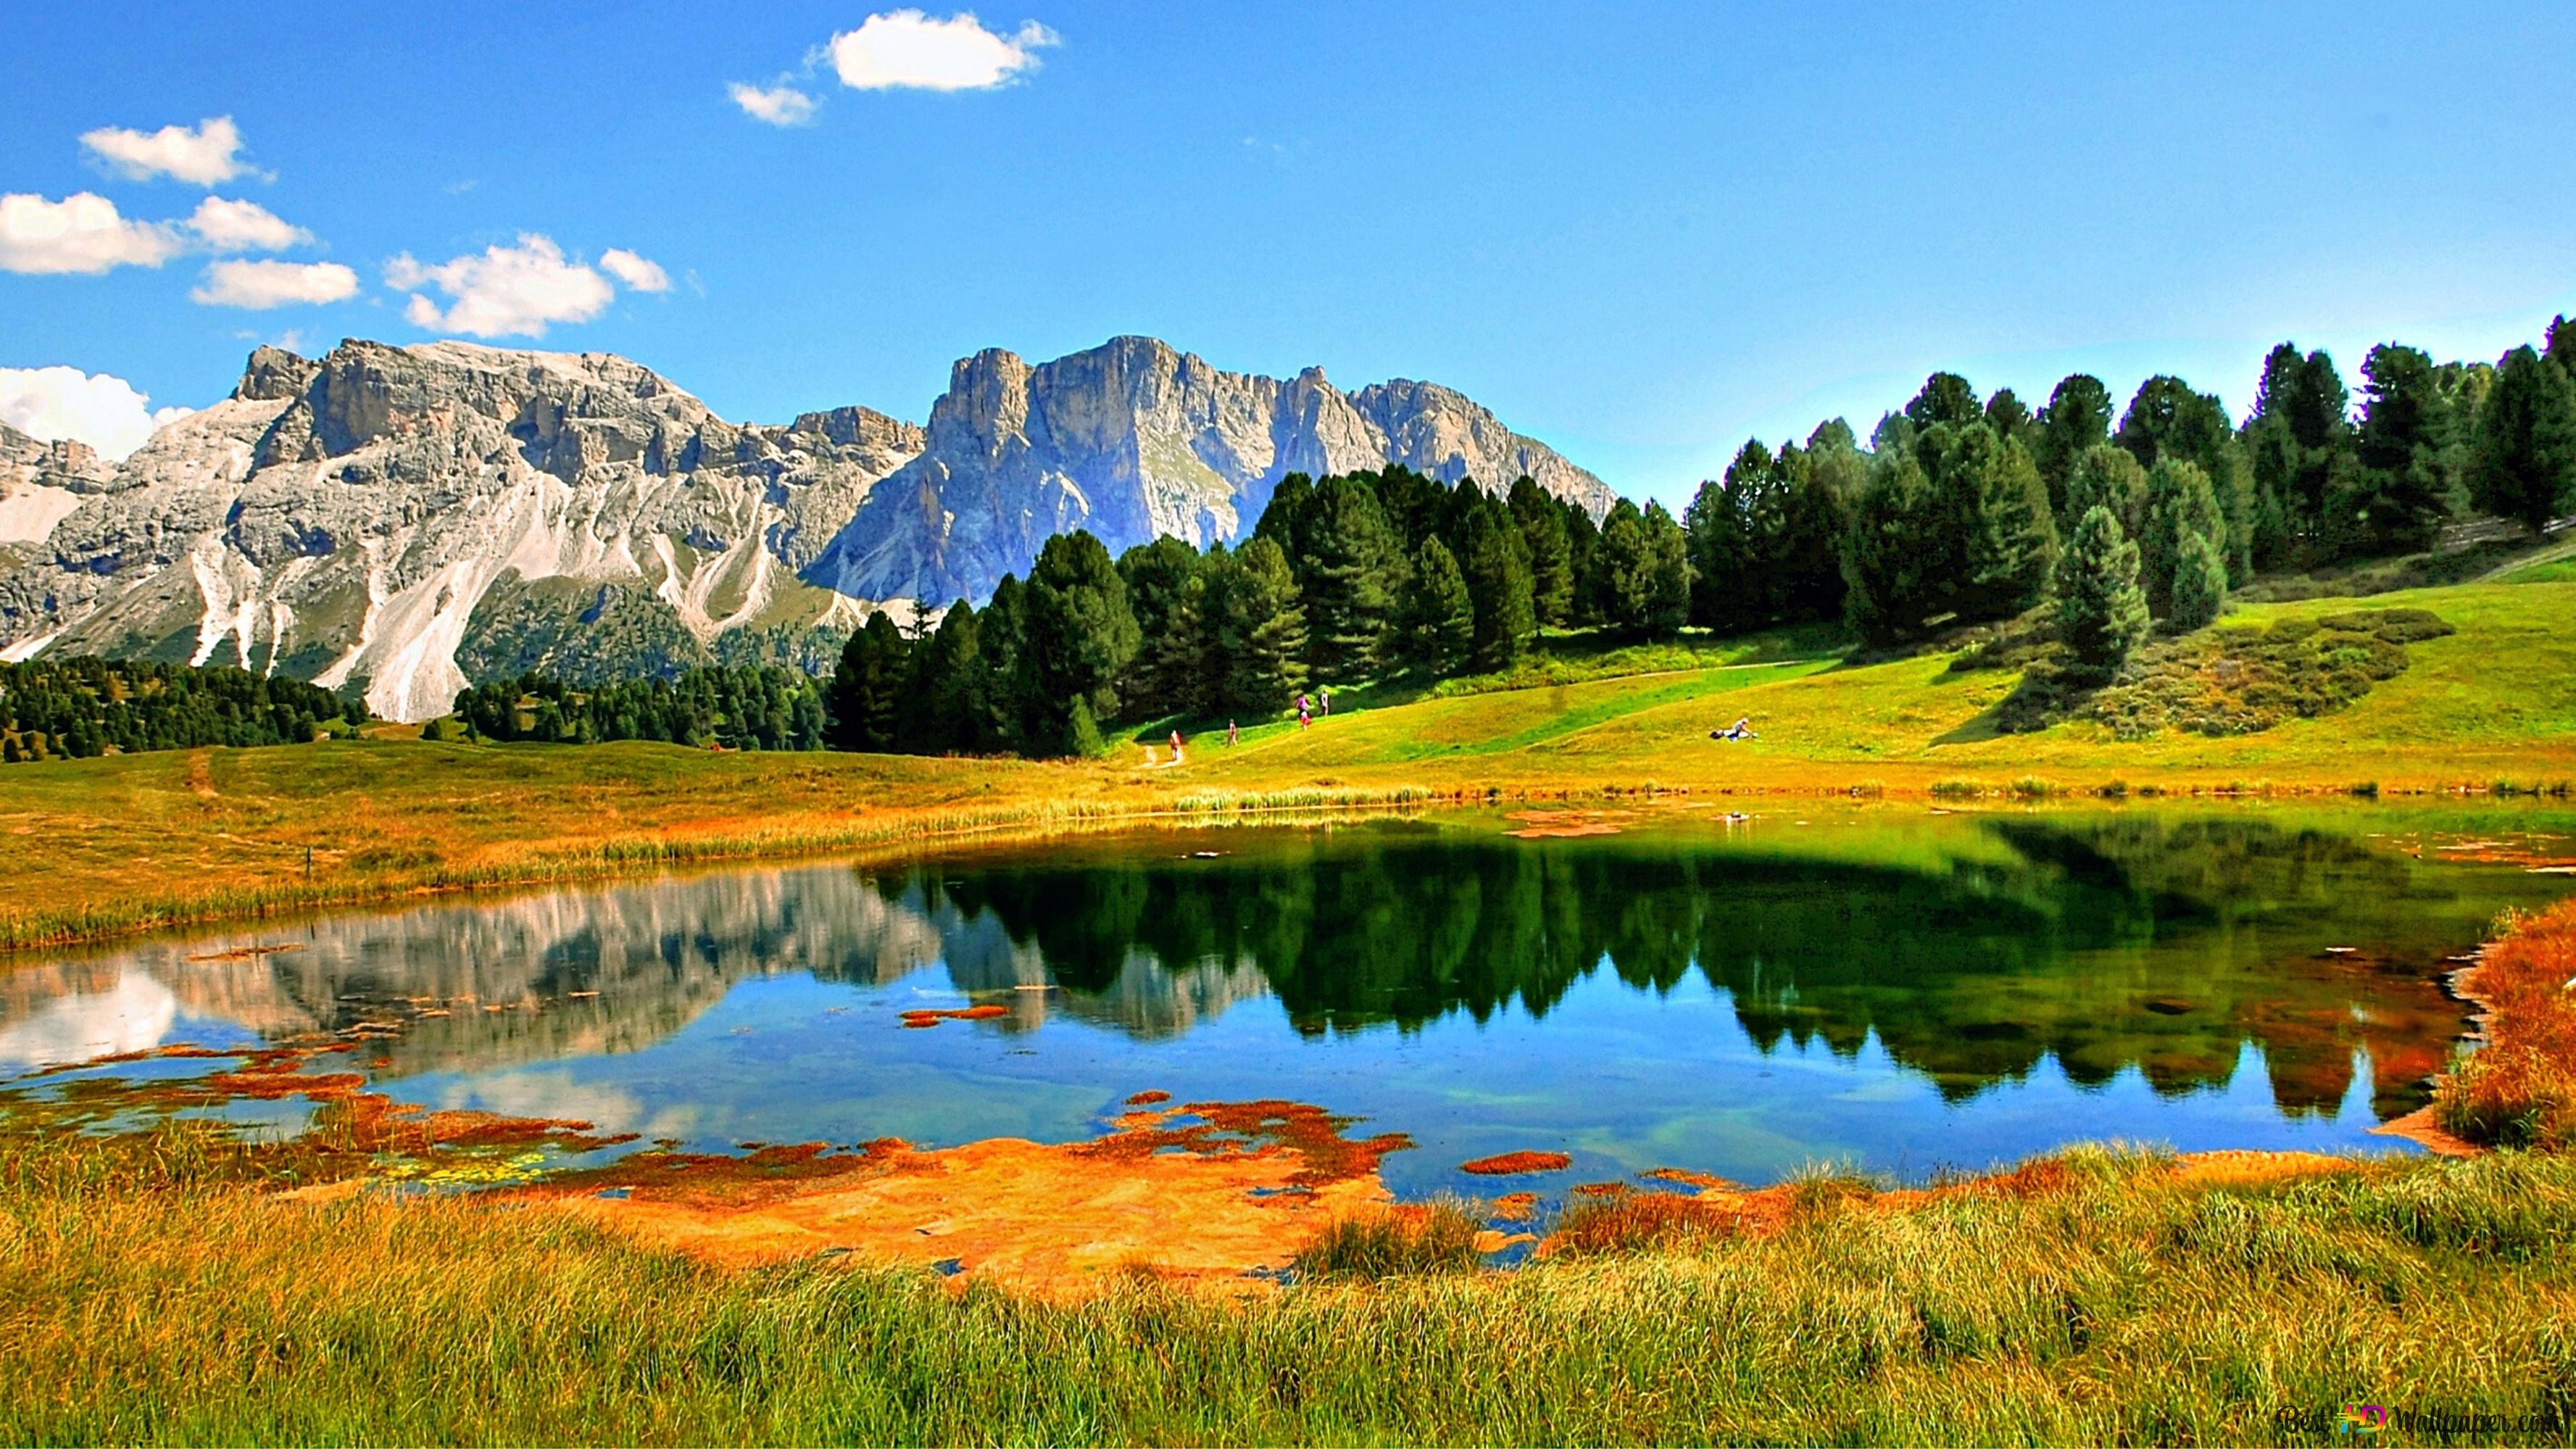 Amazing Landscape, Mountain and Lake in the middle 4K wallpaper download